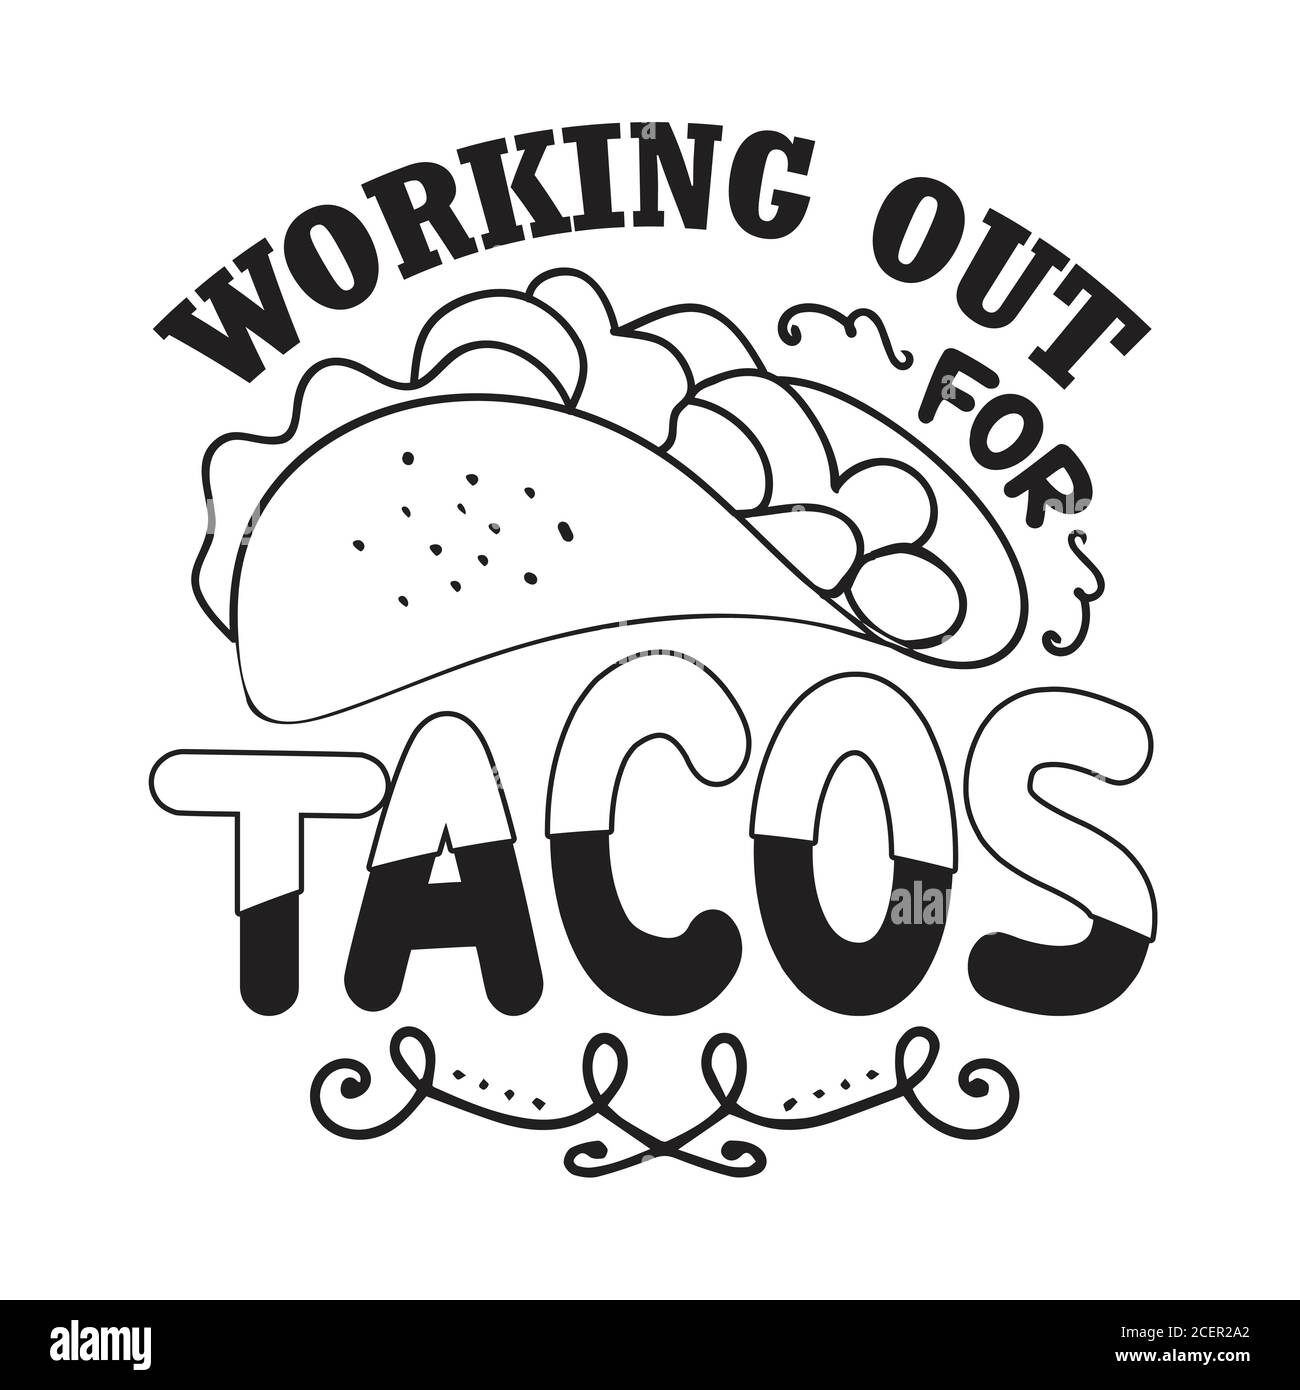 Taco Quote and Saying good for poster. Working out tacos Stock Vector